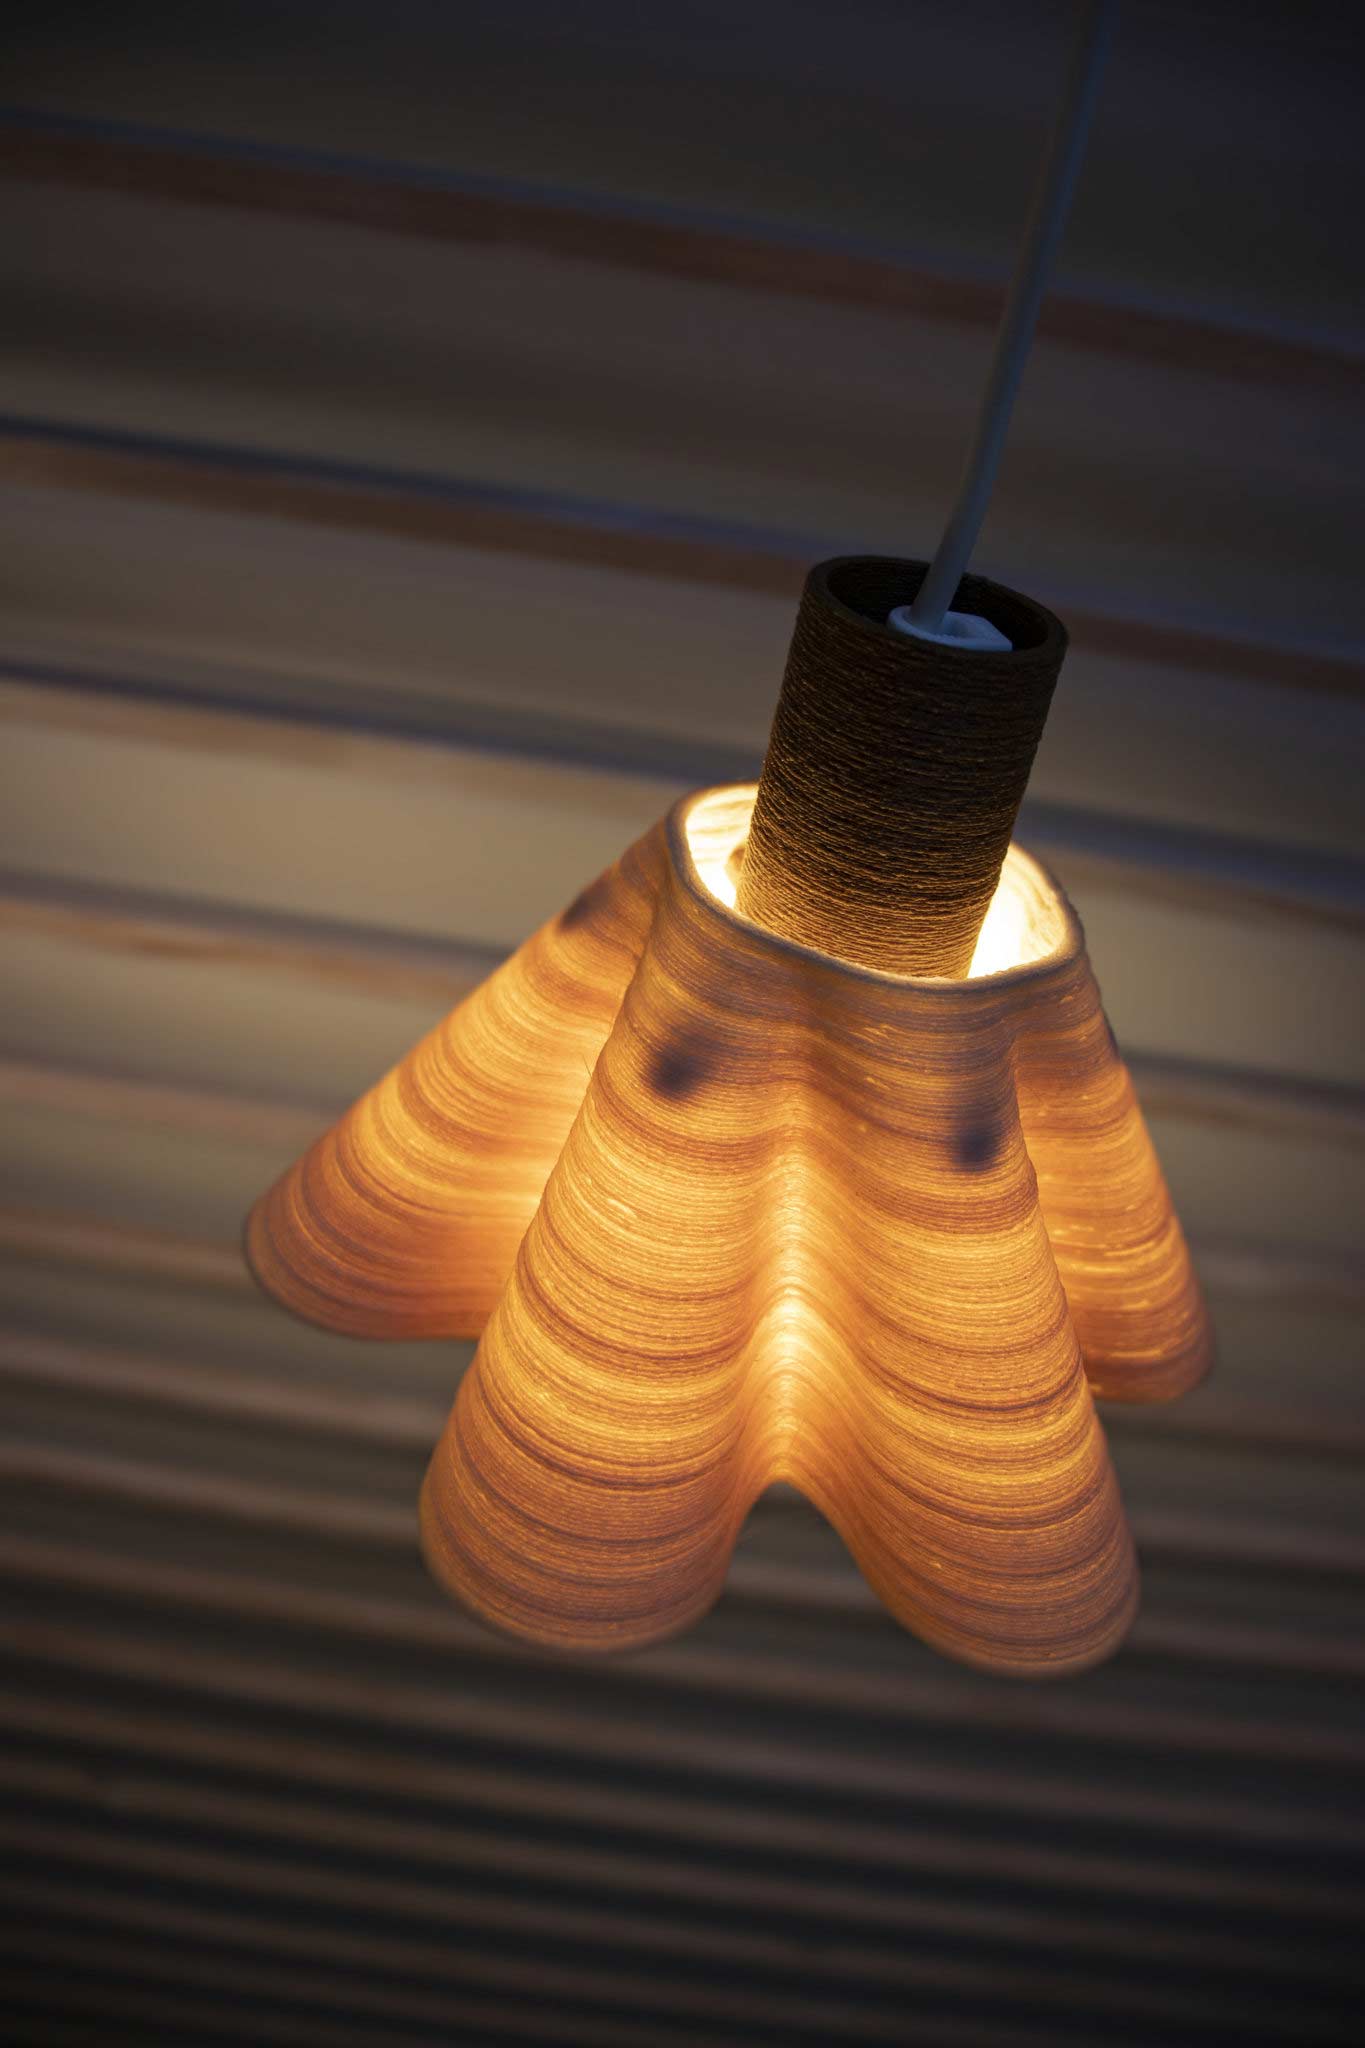 Lamp shade 3D printed from the cellulose-based materials by FDM. Photo via NOVUM.